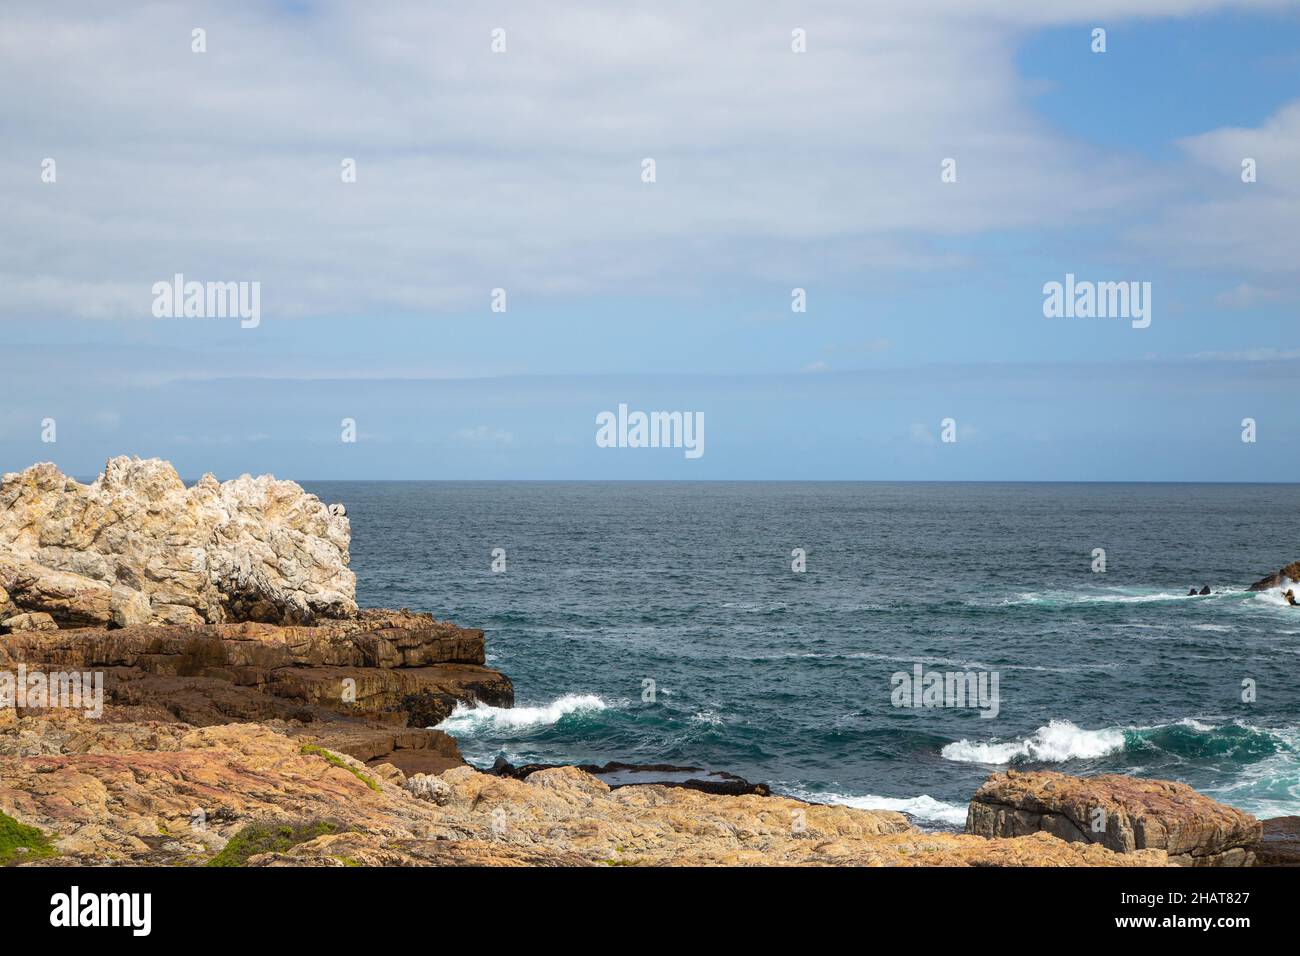 Look in the Walker Bay from the Gearing Point in Hermanus, Western Cape of South Africa Stock Photo